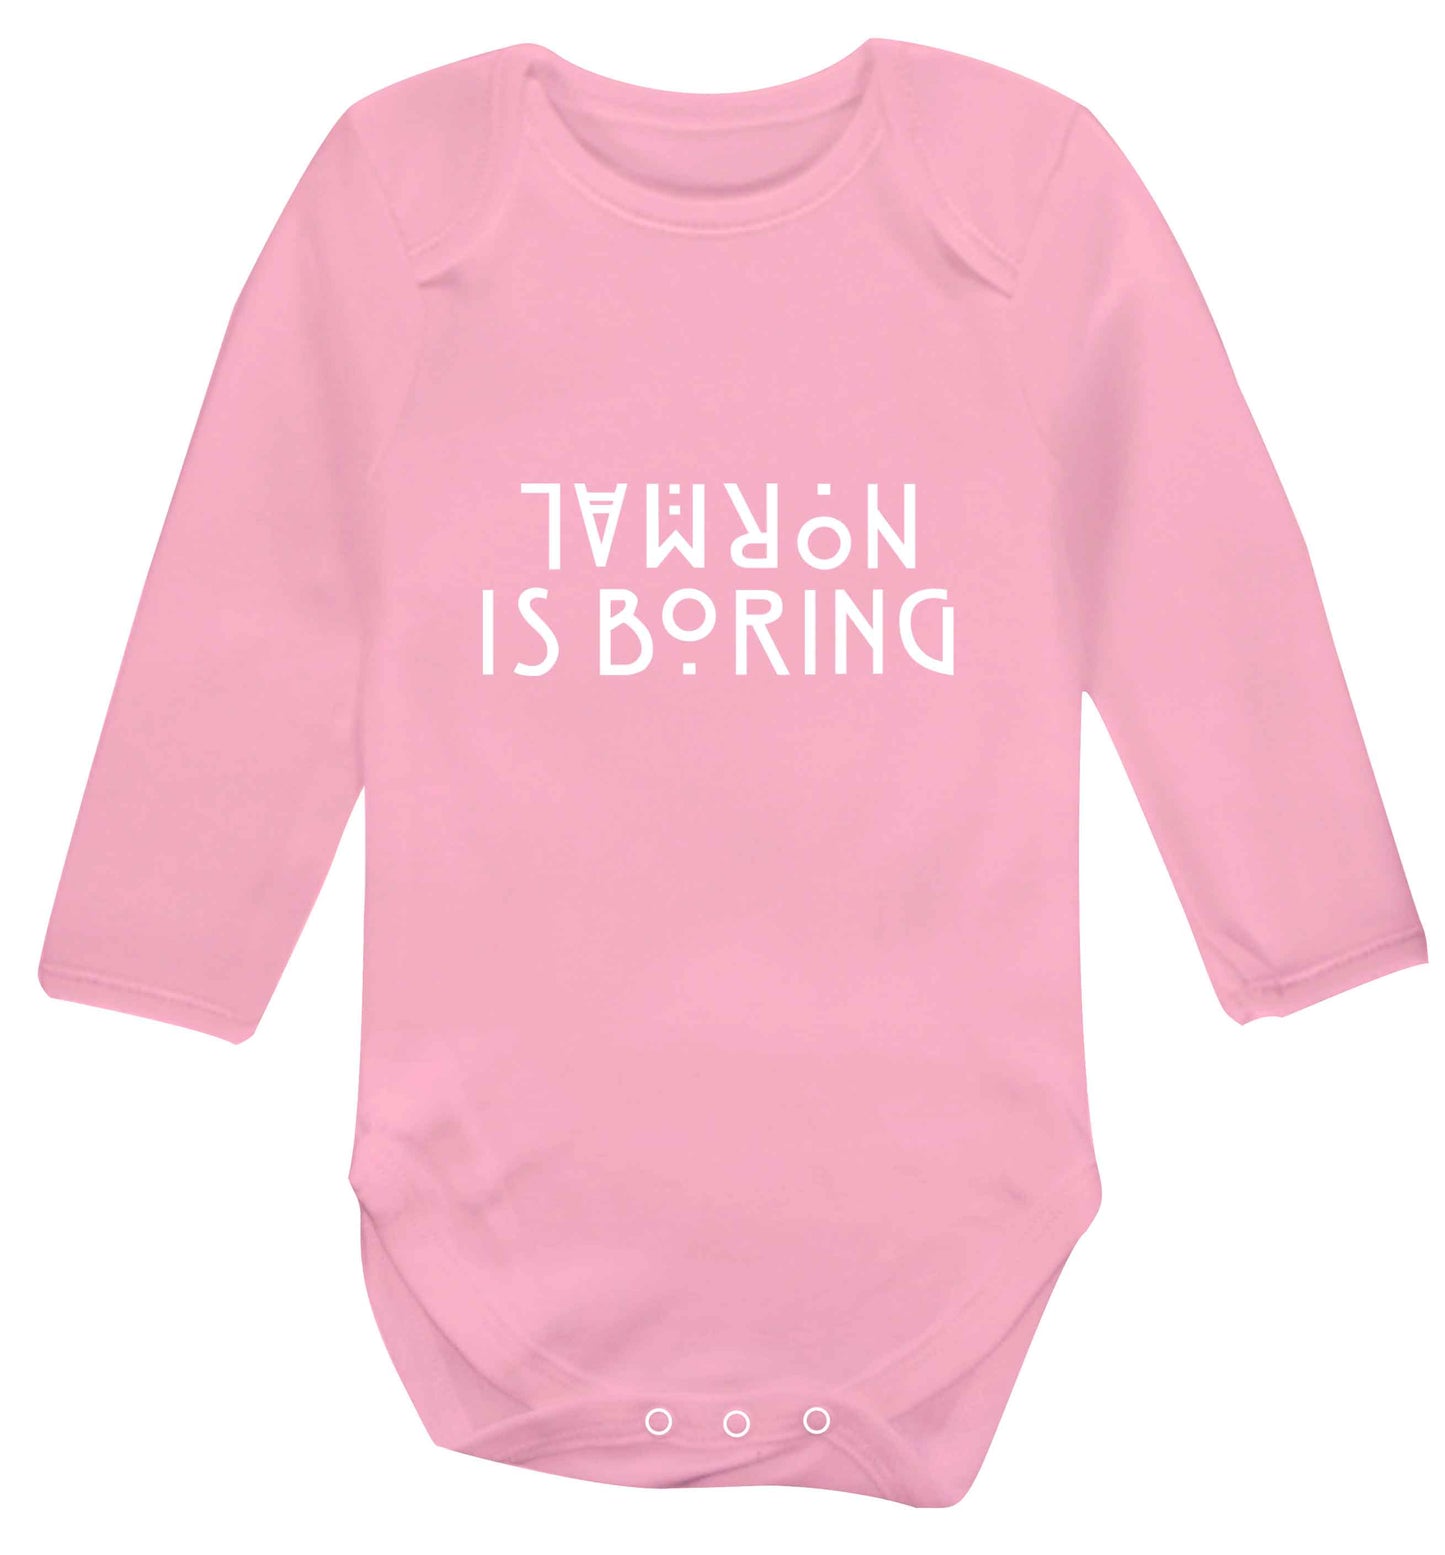 Normal is boring baby vest long sleeved pale pink 6-12 months